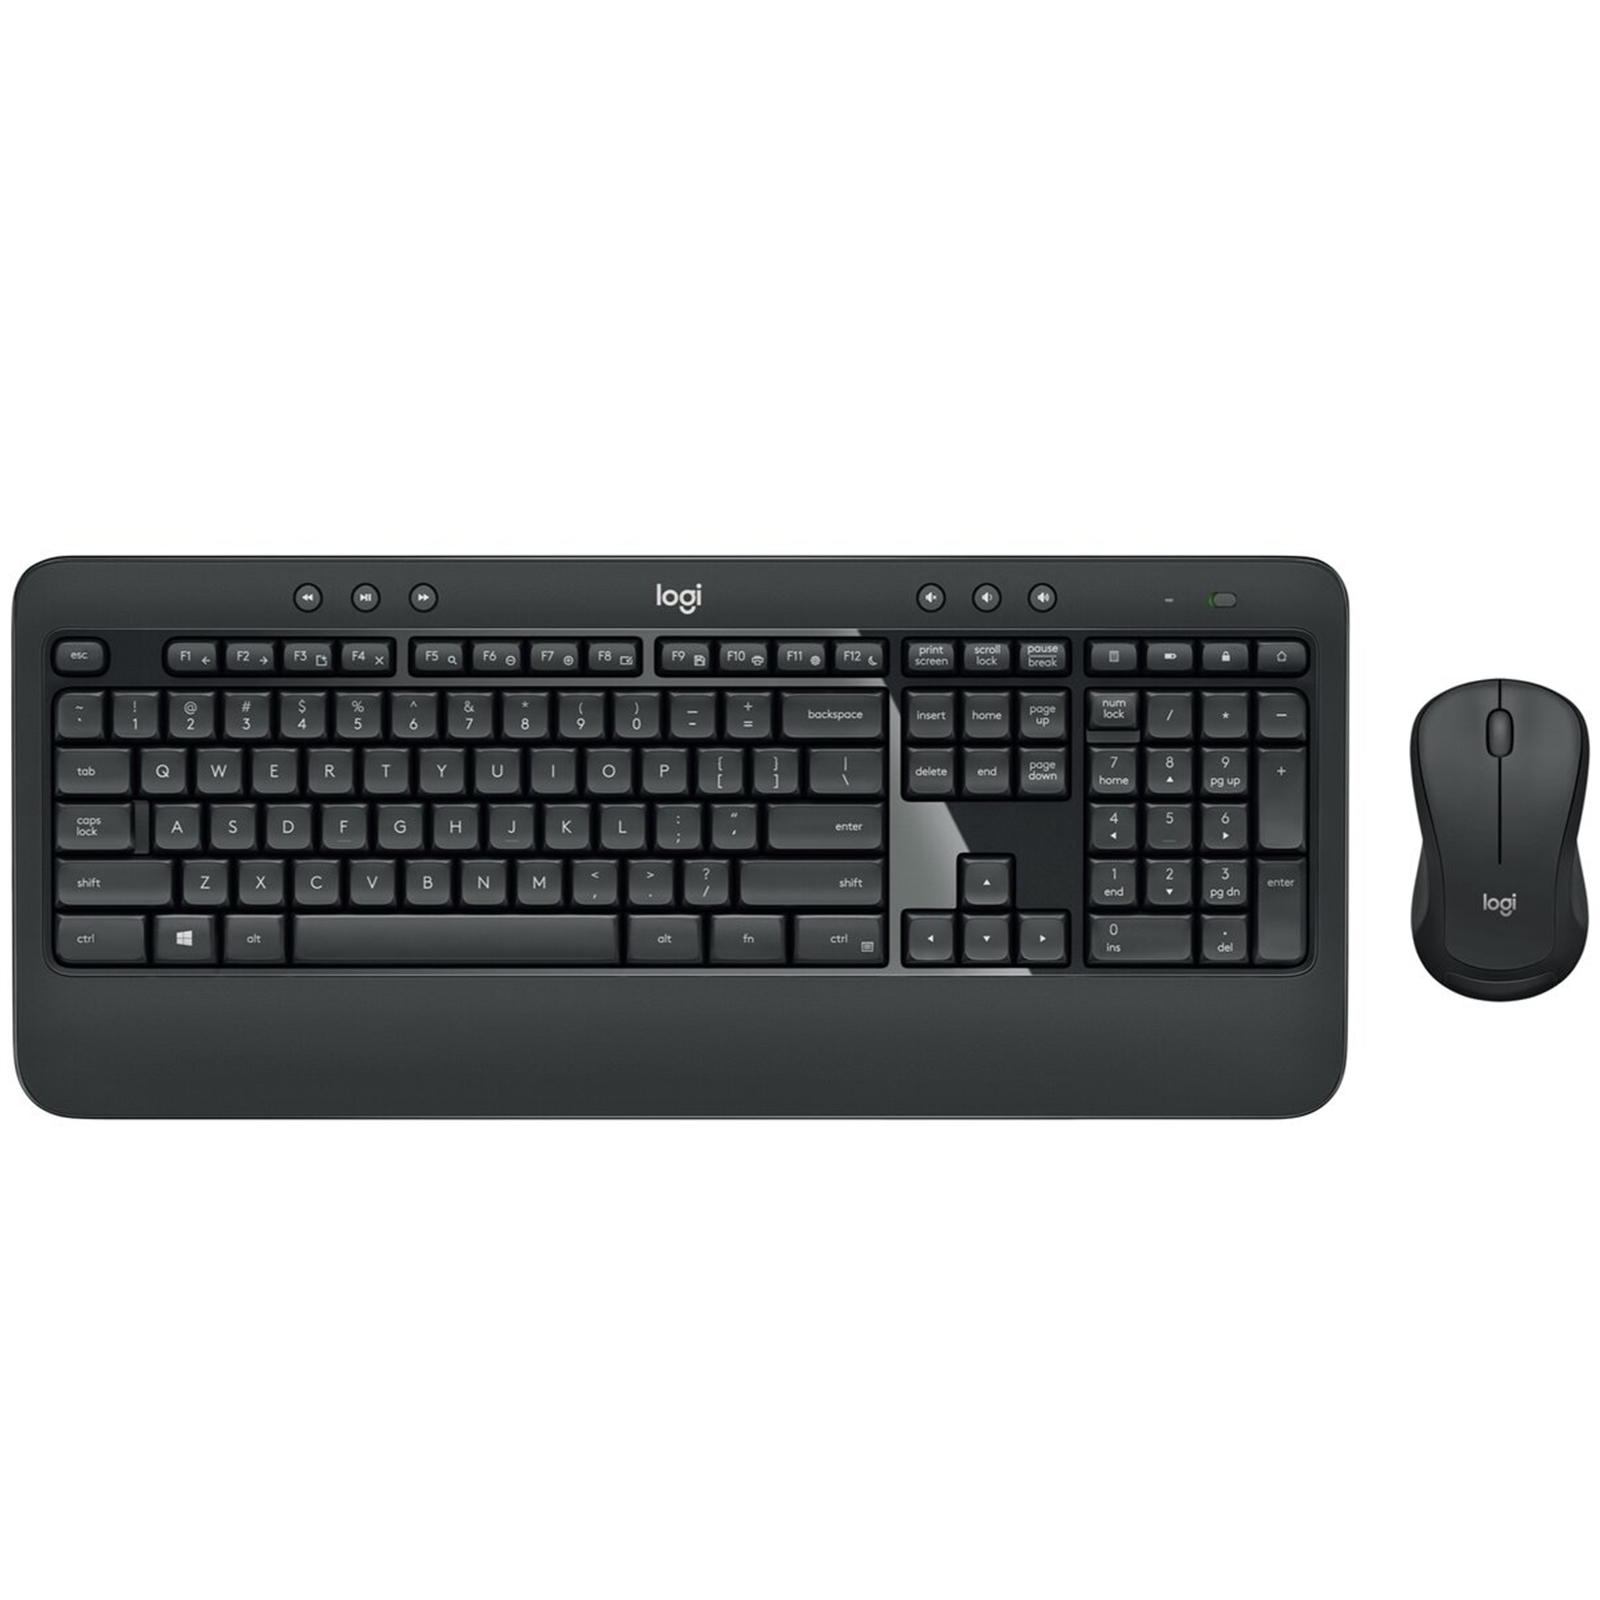 Logitech MK540 Advanced Wireless Keyboard and Mouse Combo for Windows, 2.4 GHz Unifying USB-Receiver, Multimedia Hotkeys, 3-Year Battery Life, for PC, Laptop, QWERTY UK Layout, Black